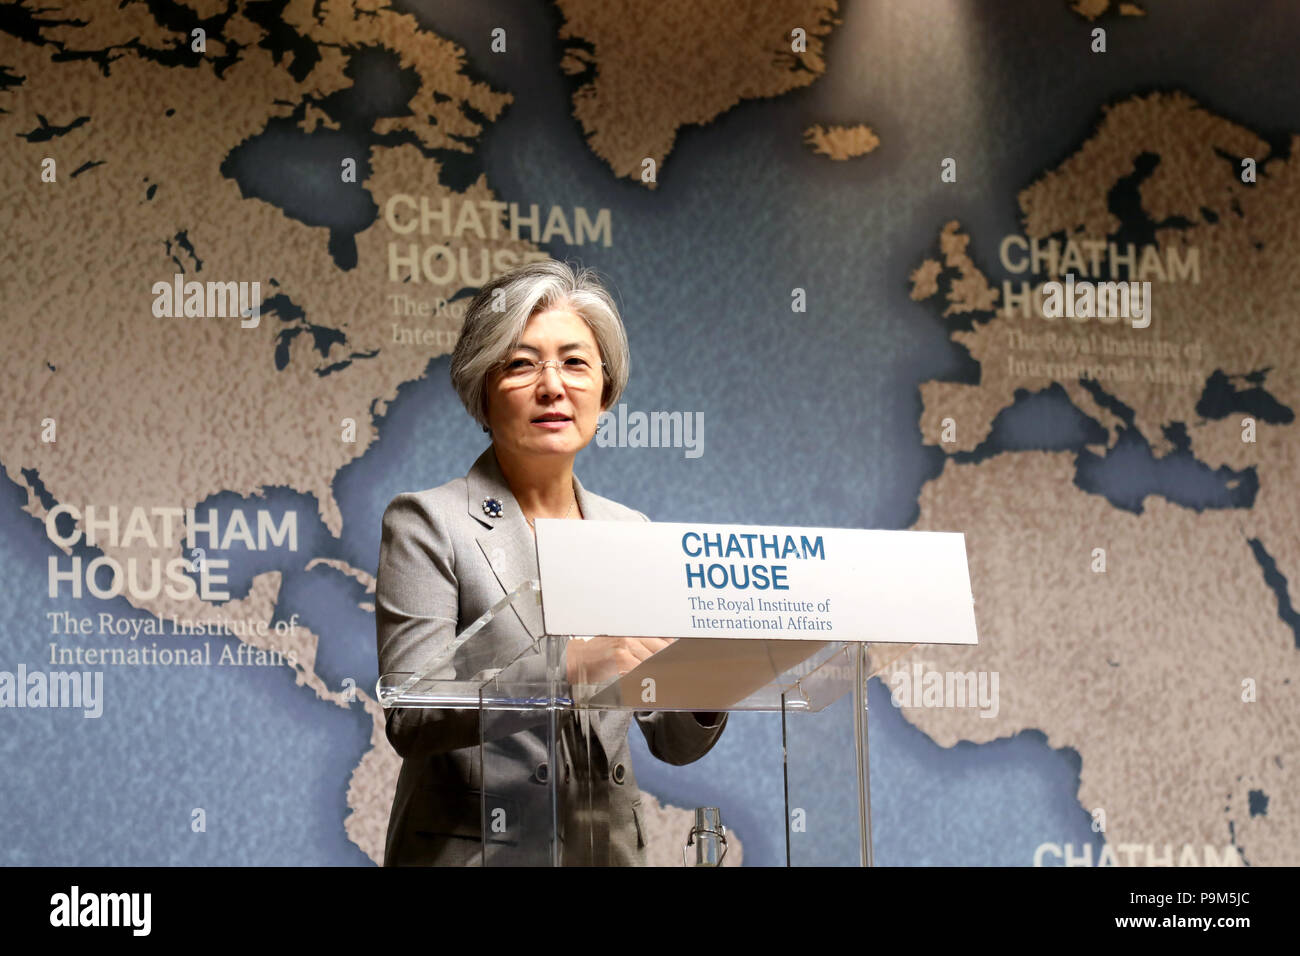 London / UK - July 19 2018: Kang Kyung-wha, Minister of Foreign Affairs of the Republic of Korea (South Korea), at the Chatham House think-tank in central London where she gave a speech on the future for the Korean peninsula Credit: Dominic Dudley/Alamy Live News Stock Photo